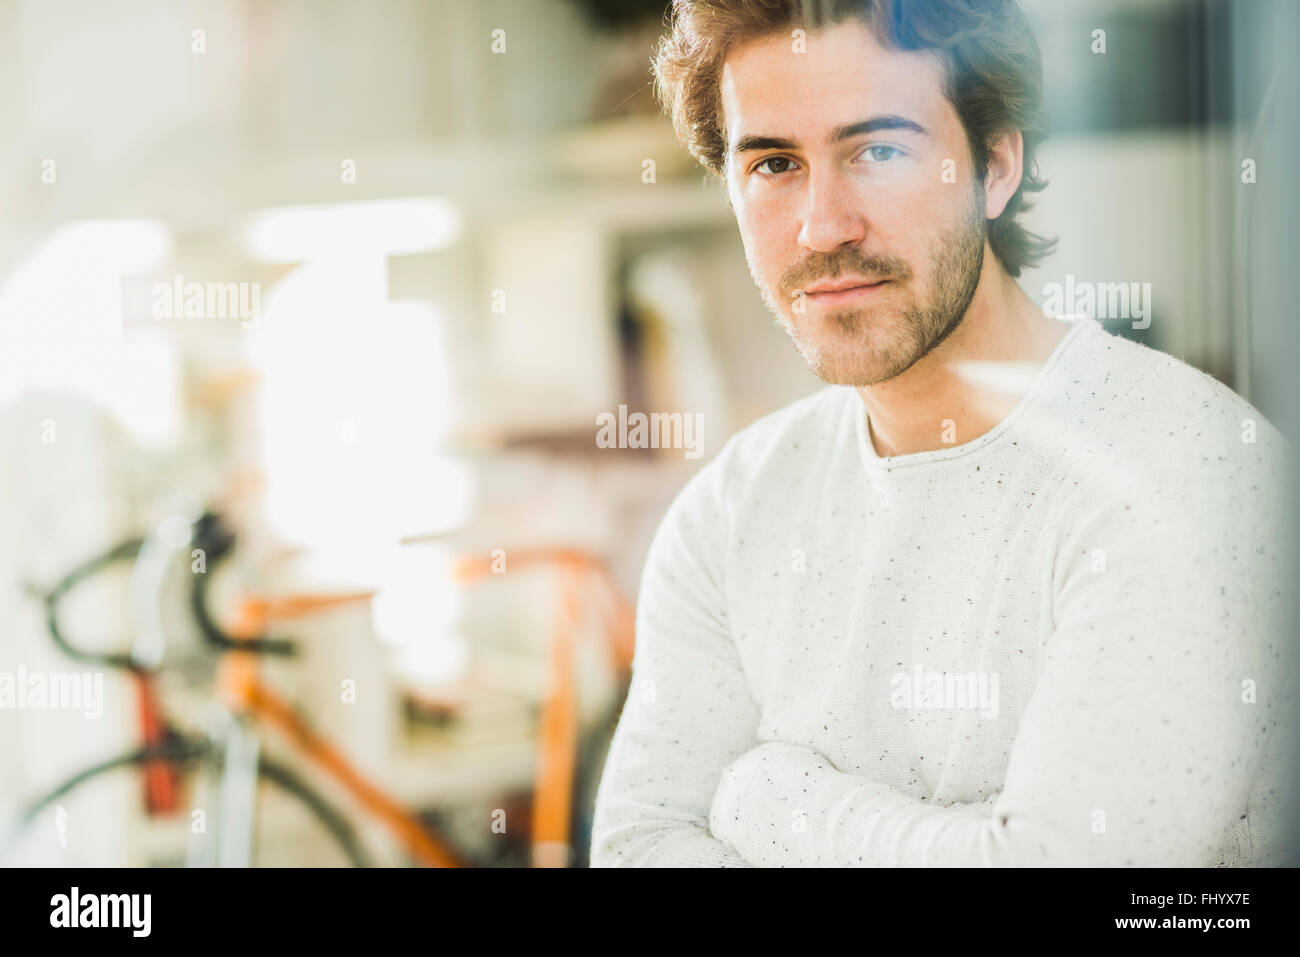 Portrait of young manwith arms crossed looking through windowpane Stock Photo